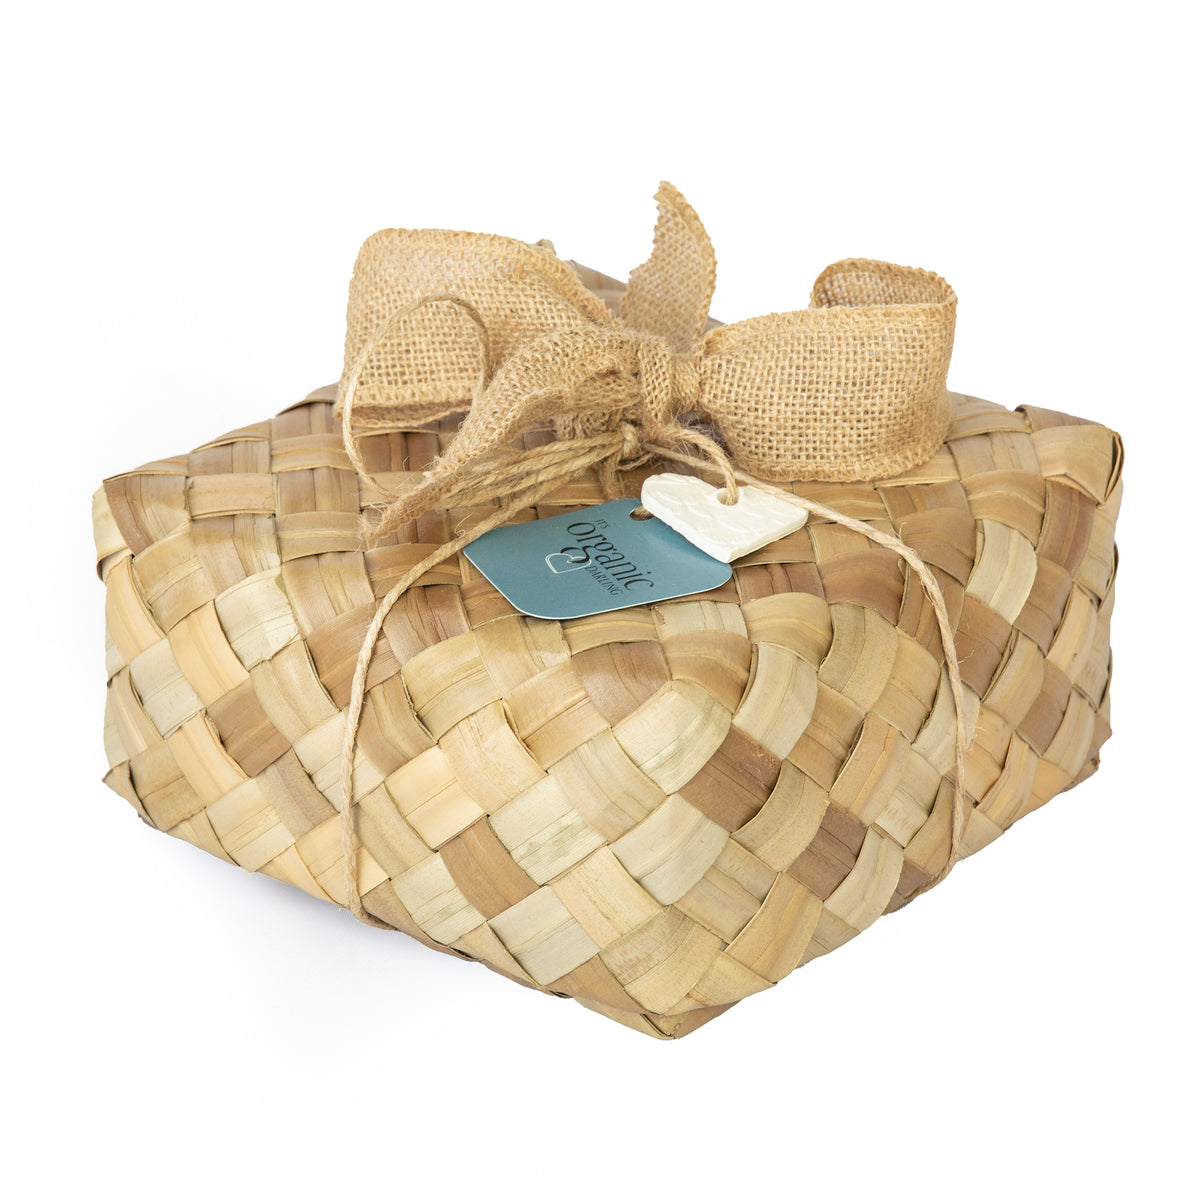 Custom Goodness Gift Flax Baskets - fill your own!